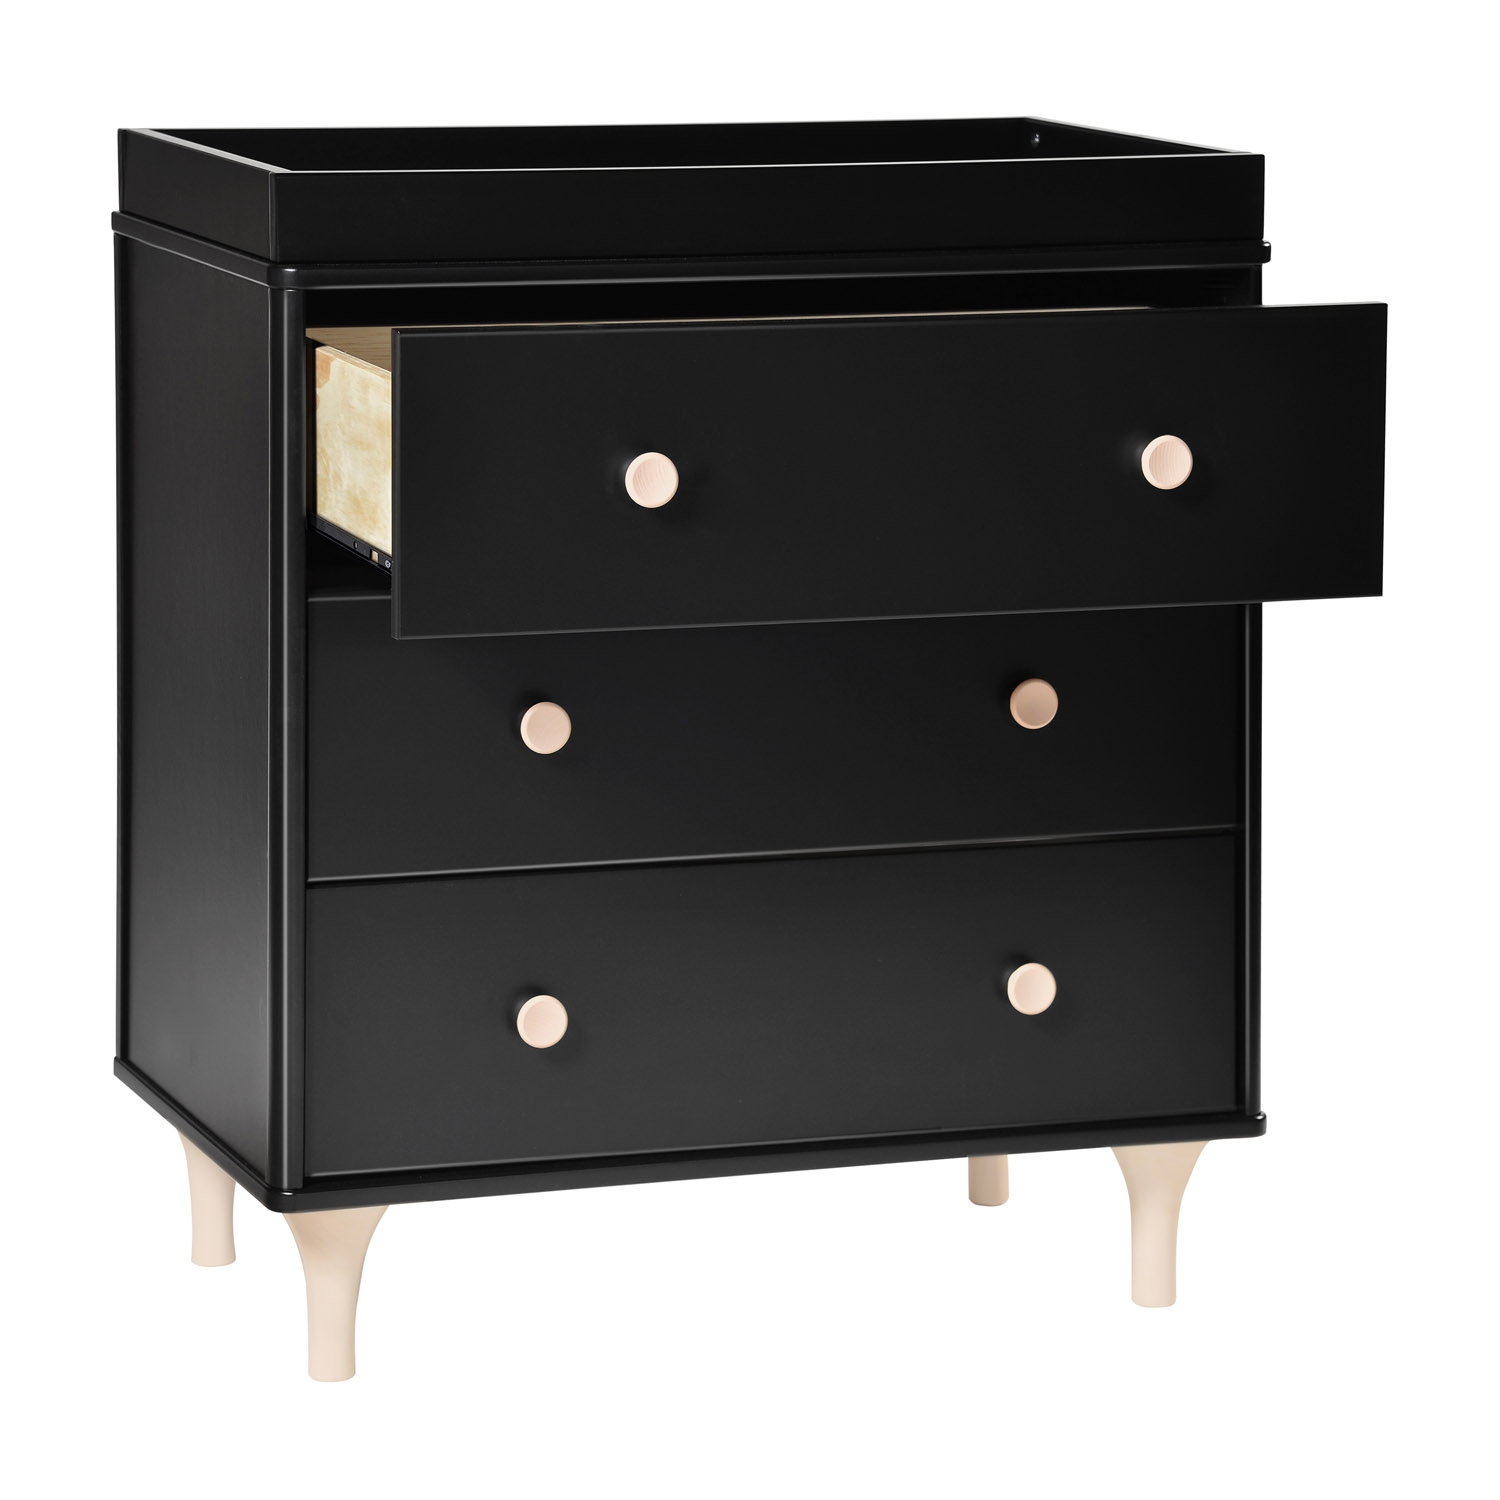 Babyletto Lolly Modern Classic Black Changing Station Dresser - Image 2